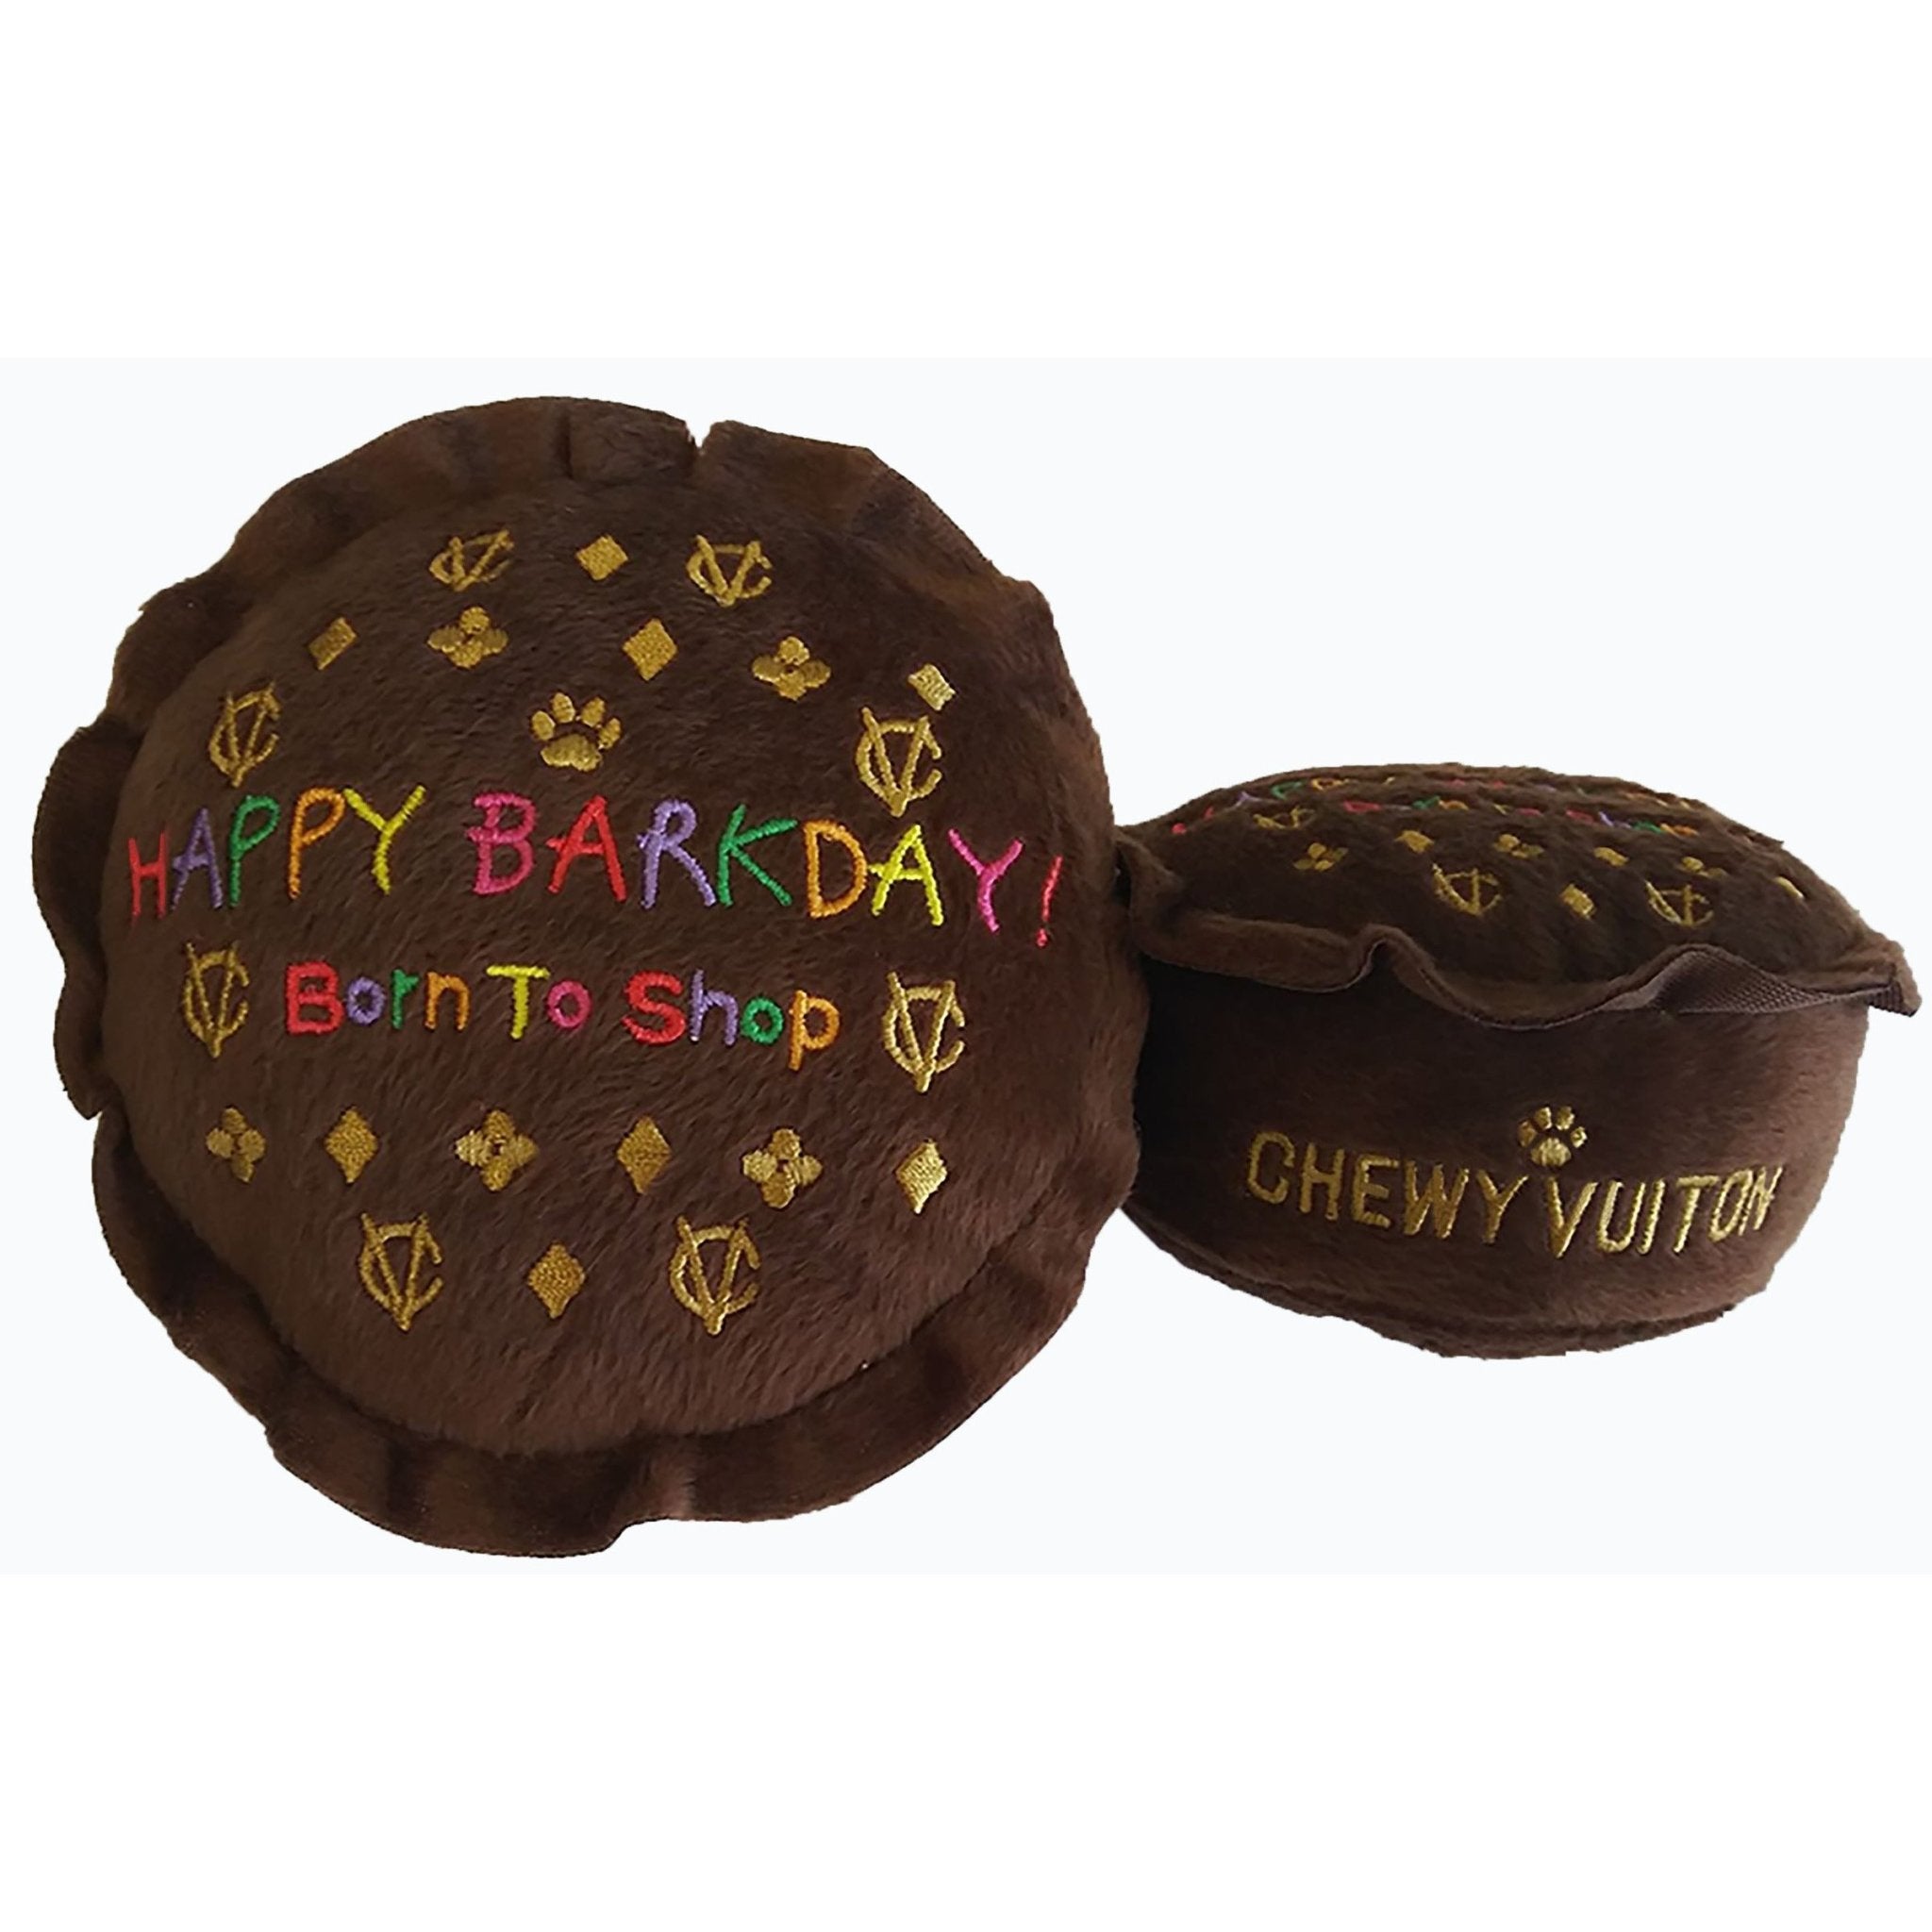 Chewy Vuiton Barkday Cake - Pooch Luxury